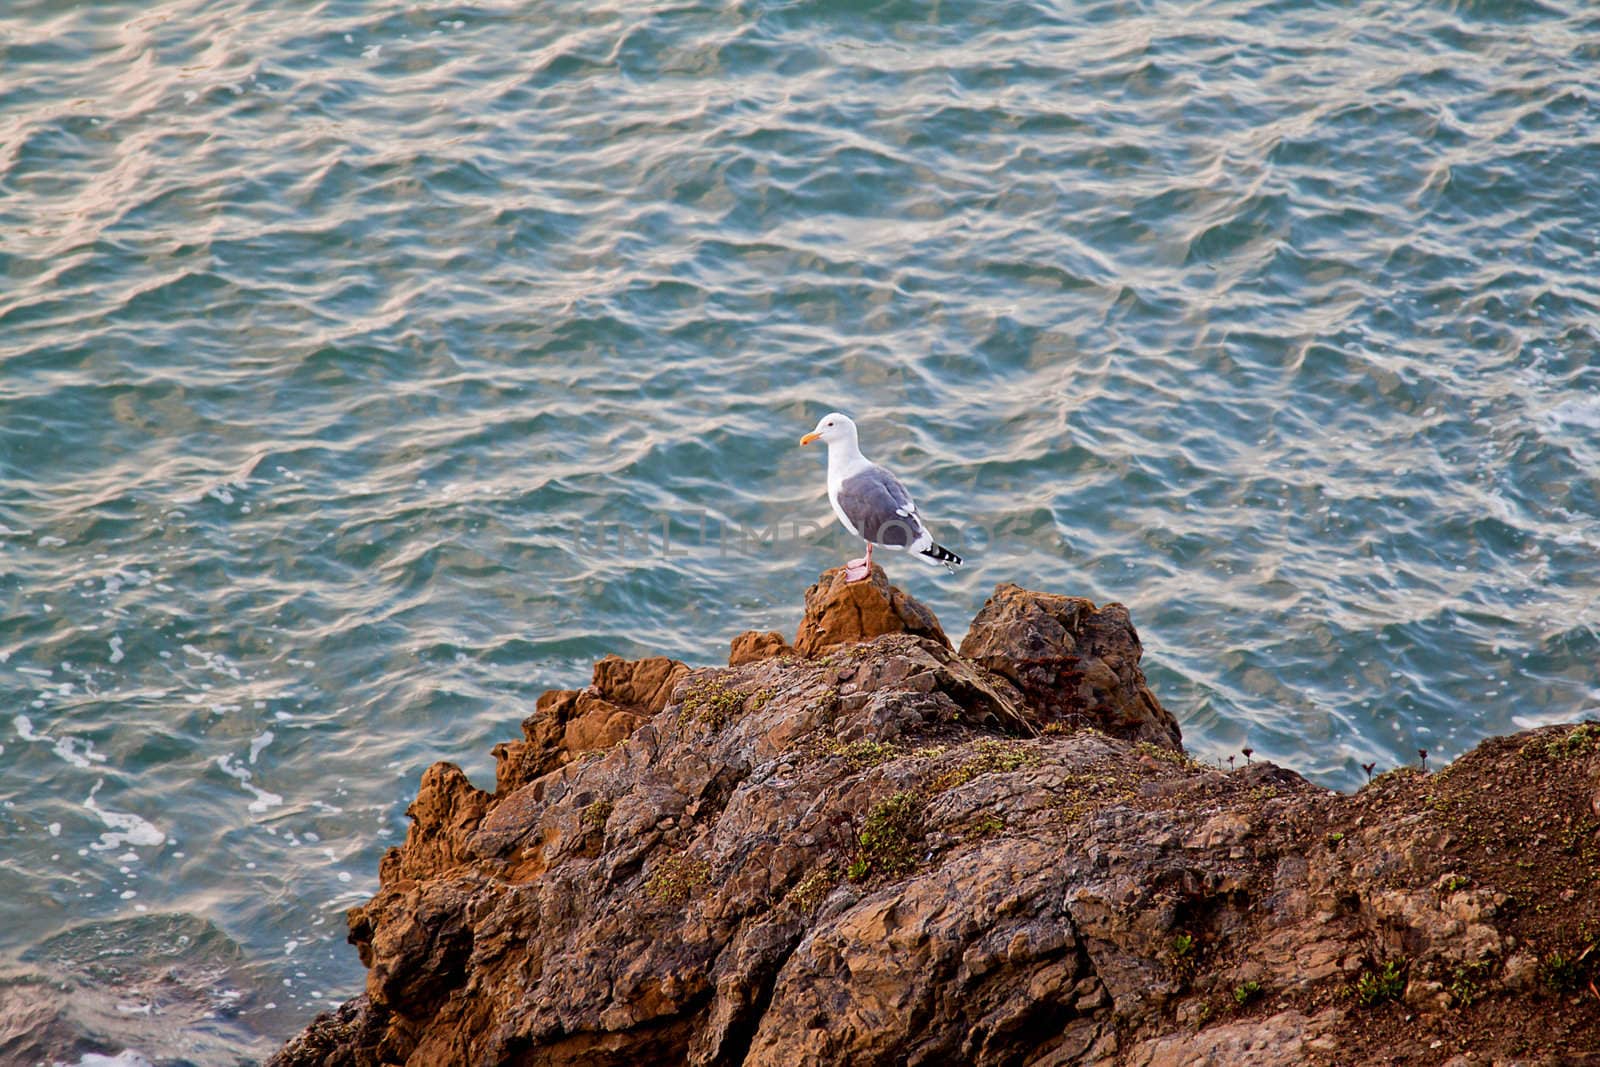 A seagull on the rock by the sea